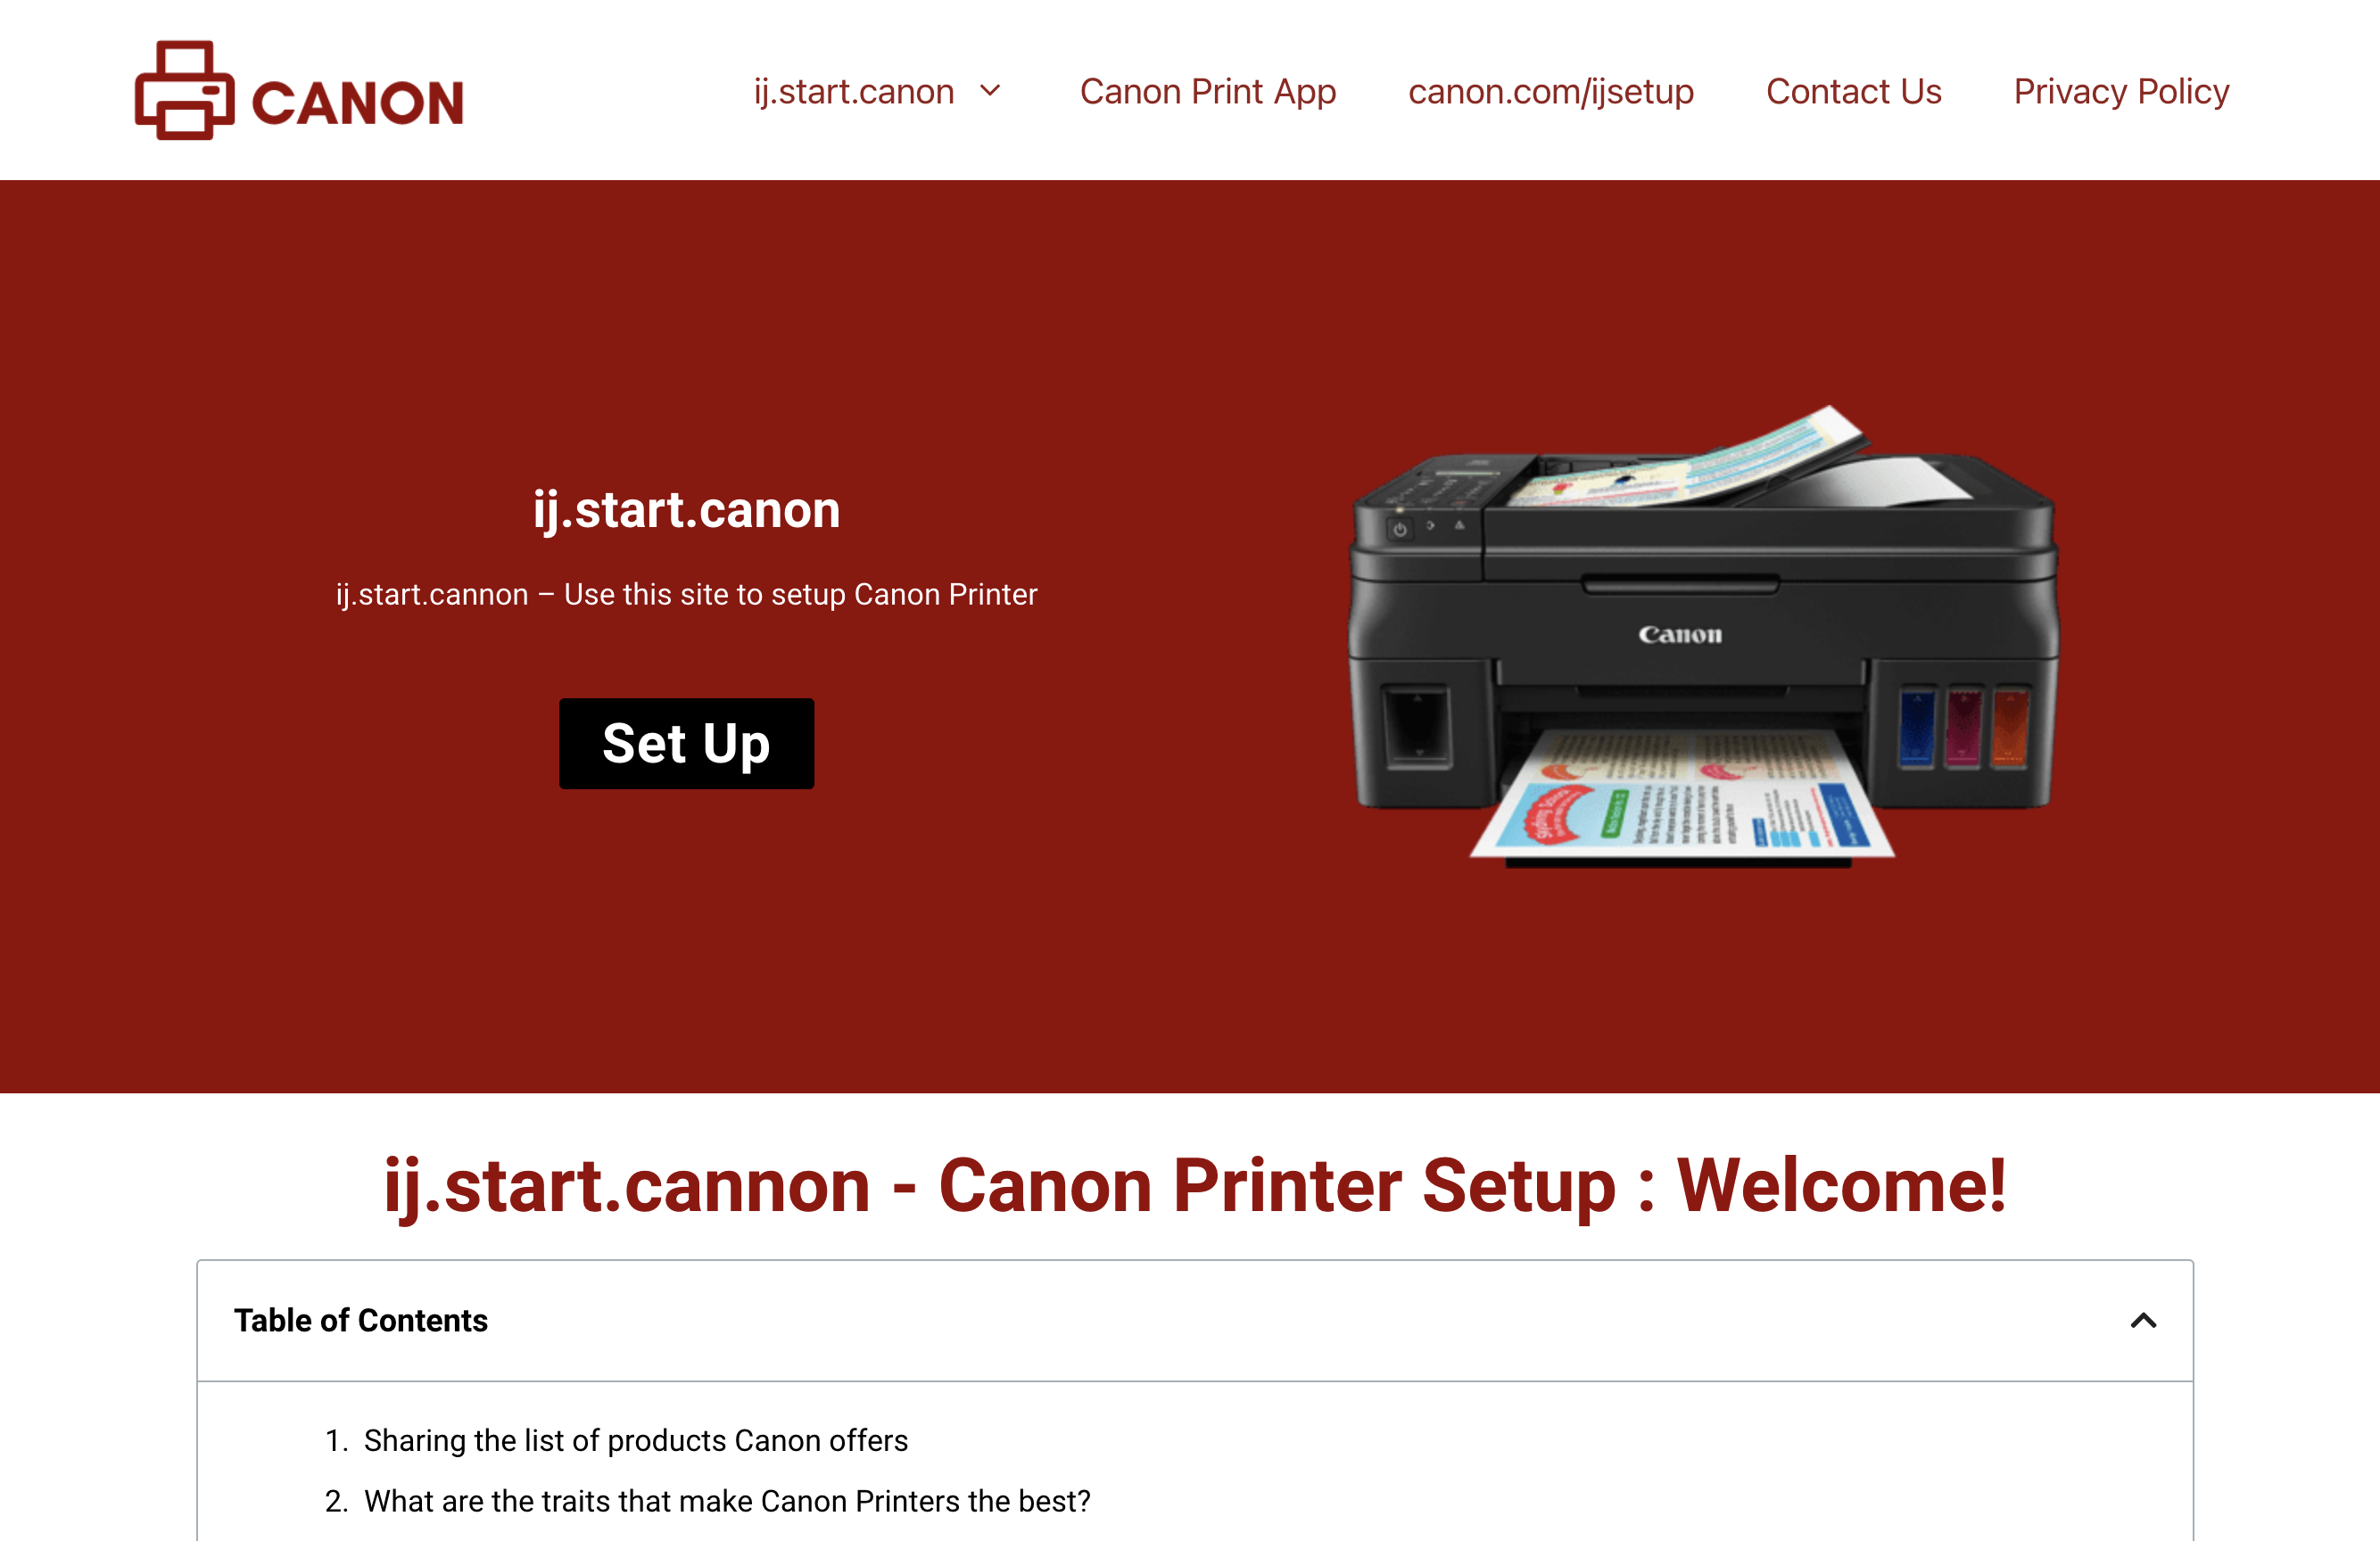 One of many fake Canon printer websites, canonijcomsetup.com, which is run by scammers and ranks incredibly high in Google's search results. (Screenshot: Gizmodo)